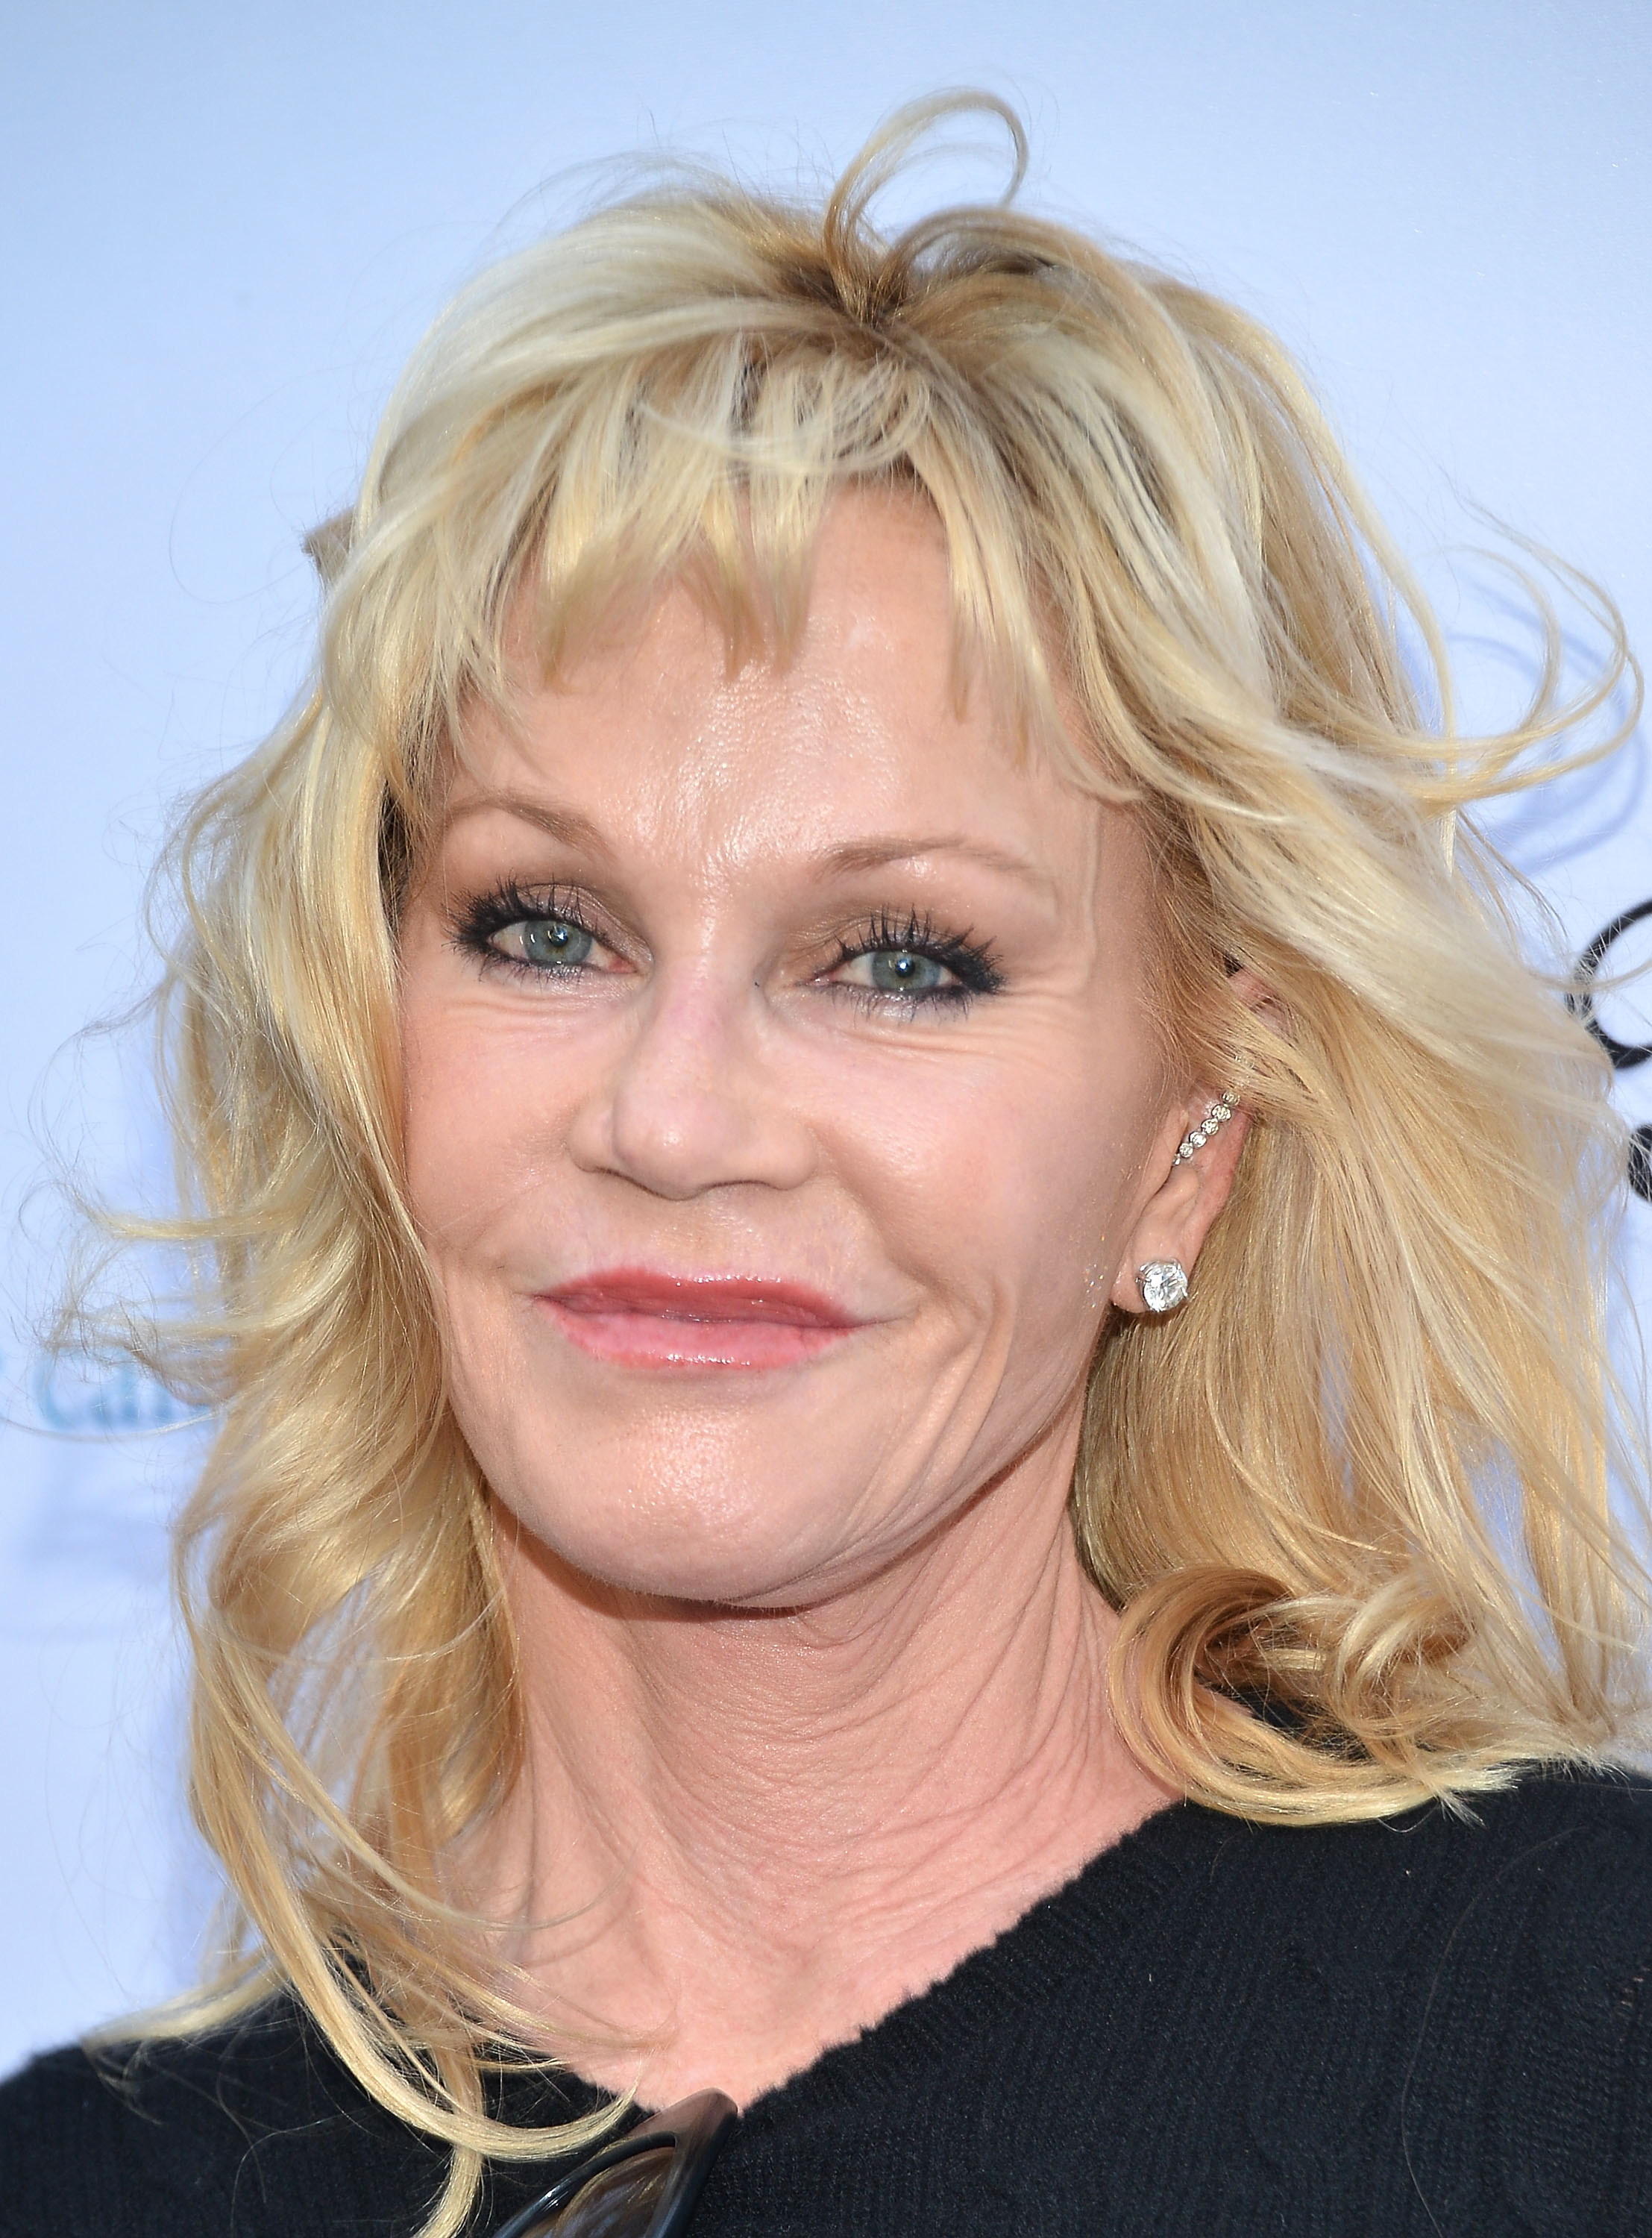 Melanie Griffith's Plastic Surgery Disaster Find out What Went Wrong